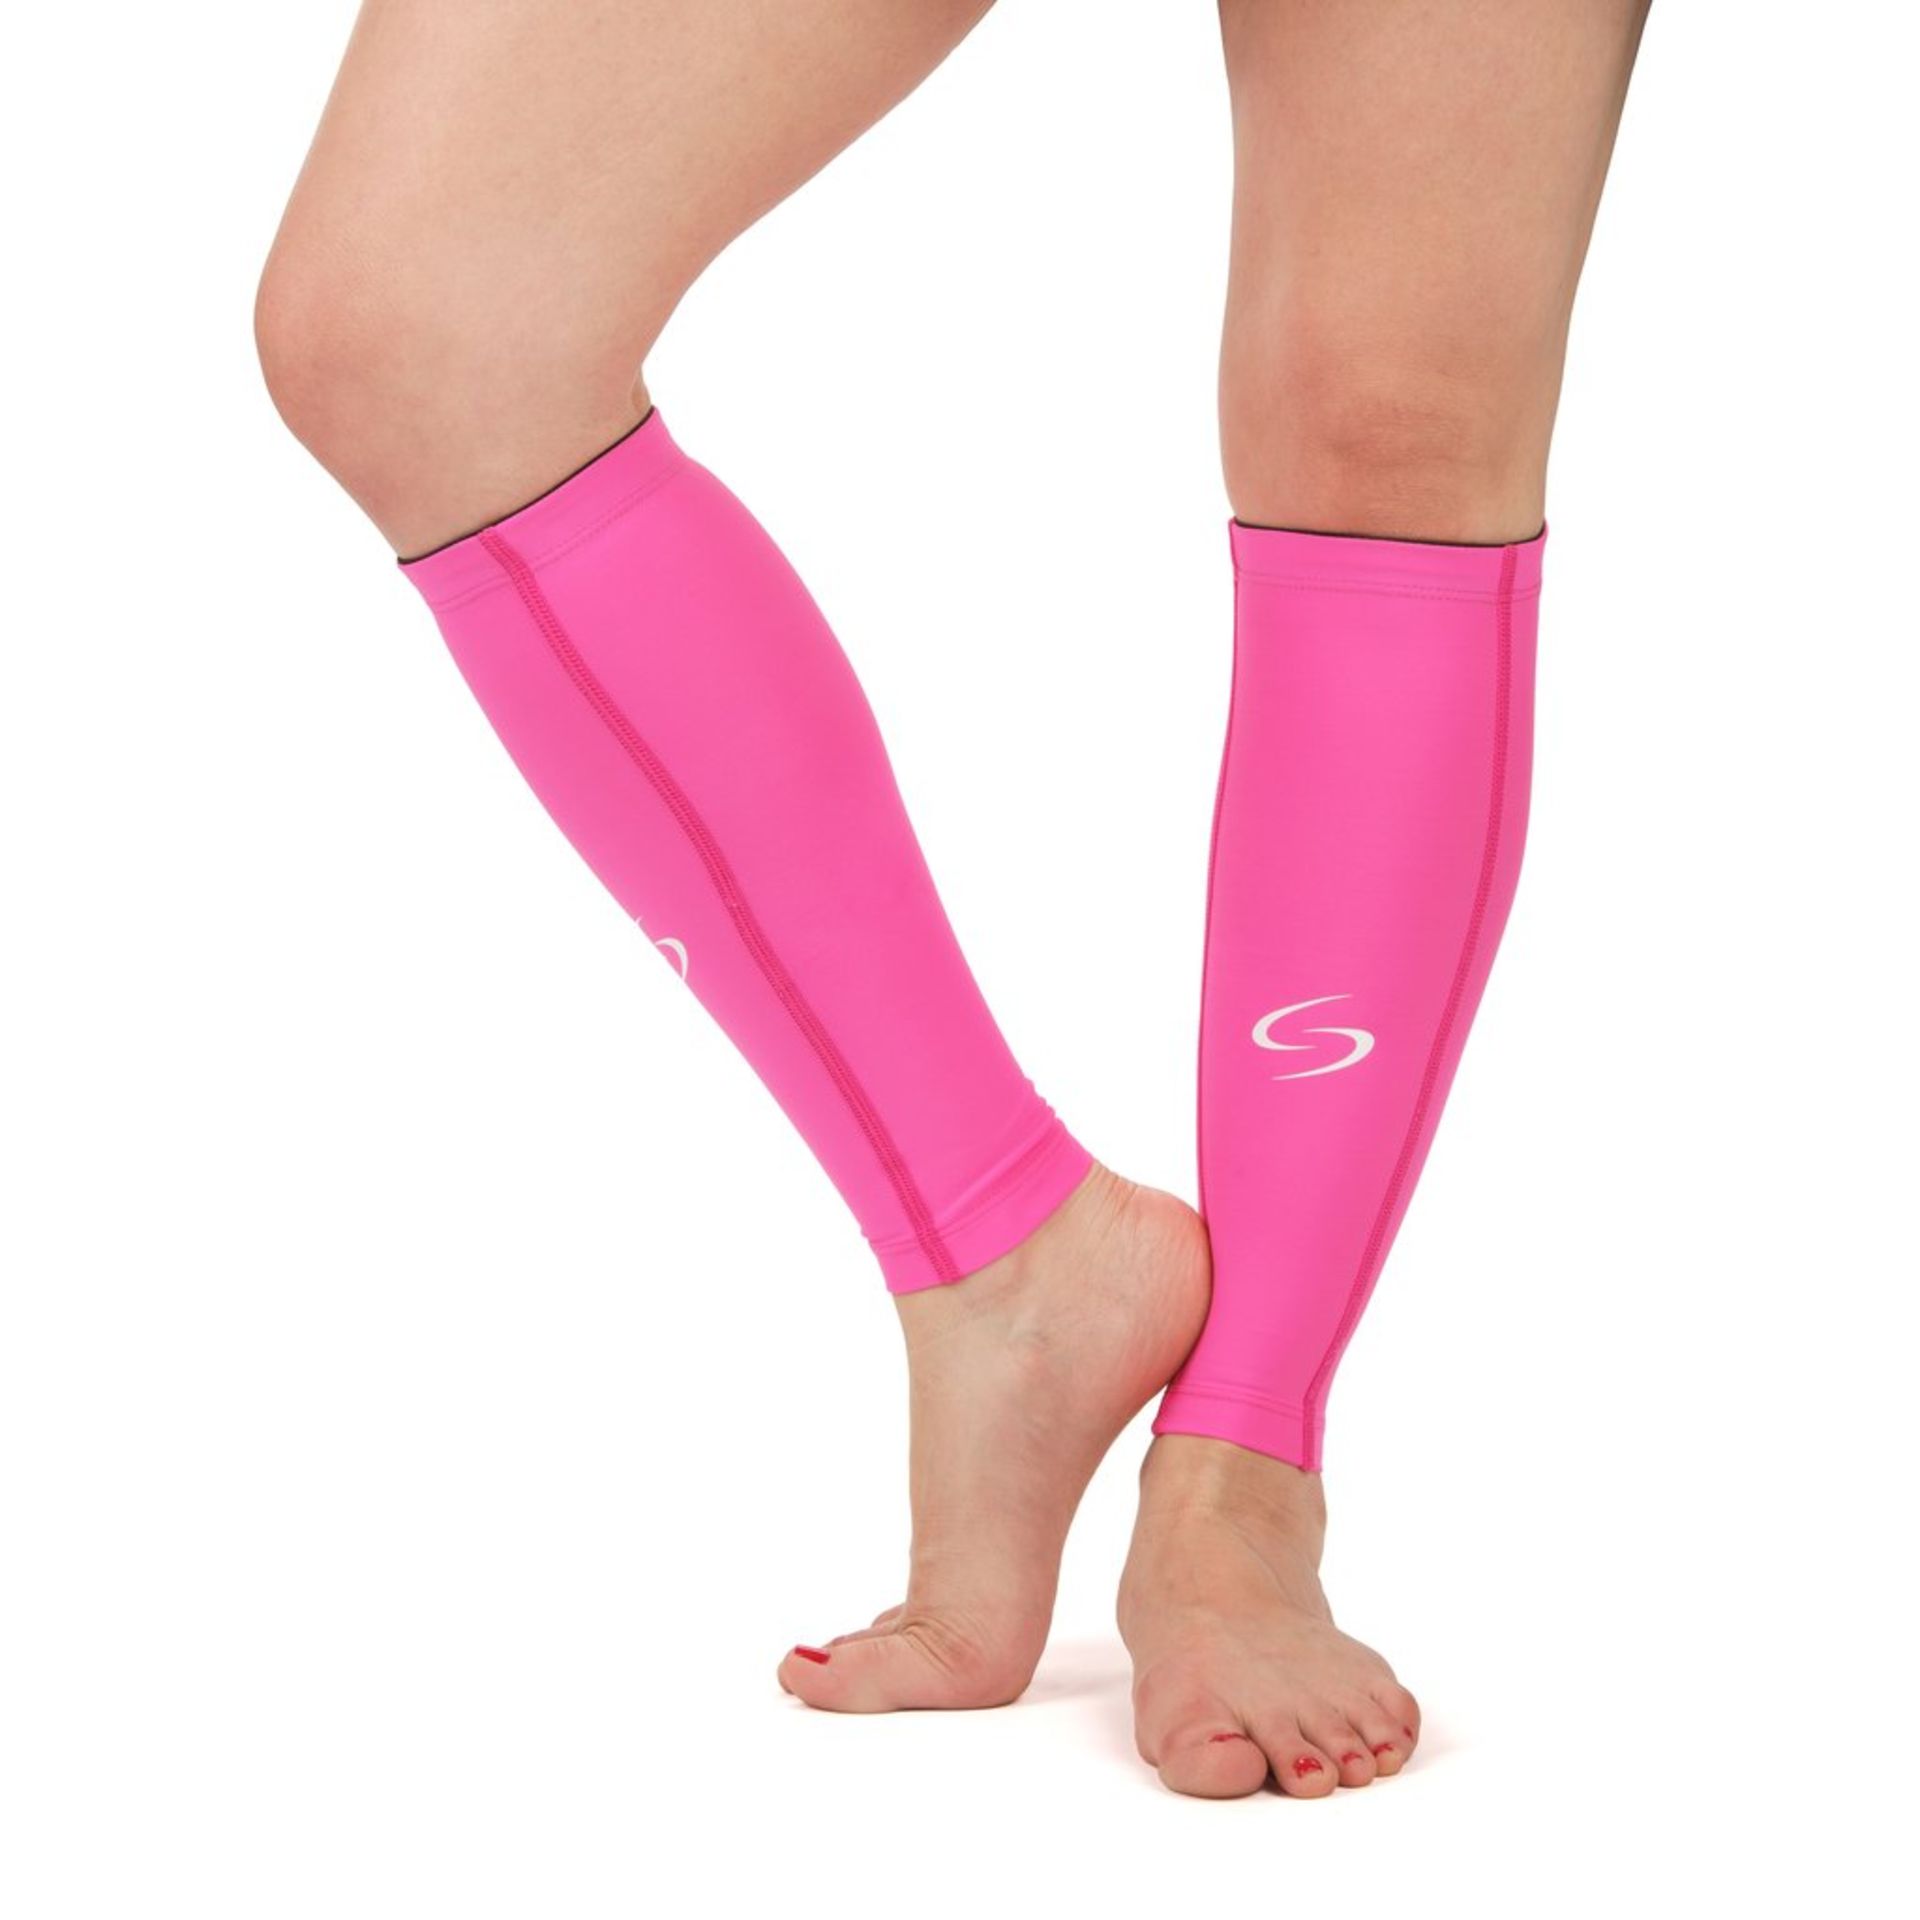 50 X BRAND NEW SHARWOOD SPORTS BRANDED PAIRS OF CALF COMPRESSION SLEEVES - PINK - LARGE - (PICK